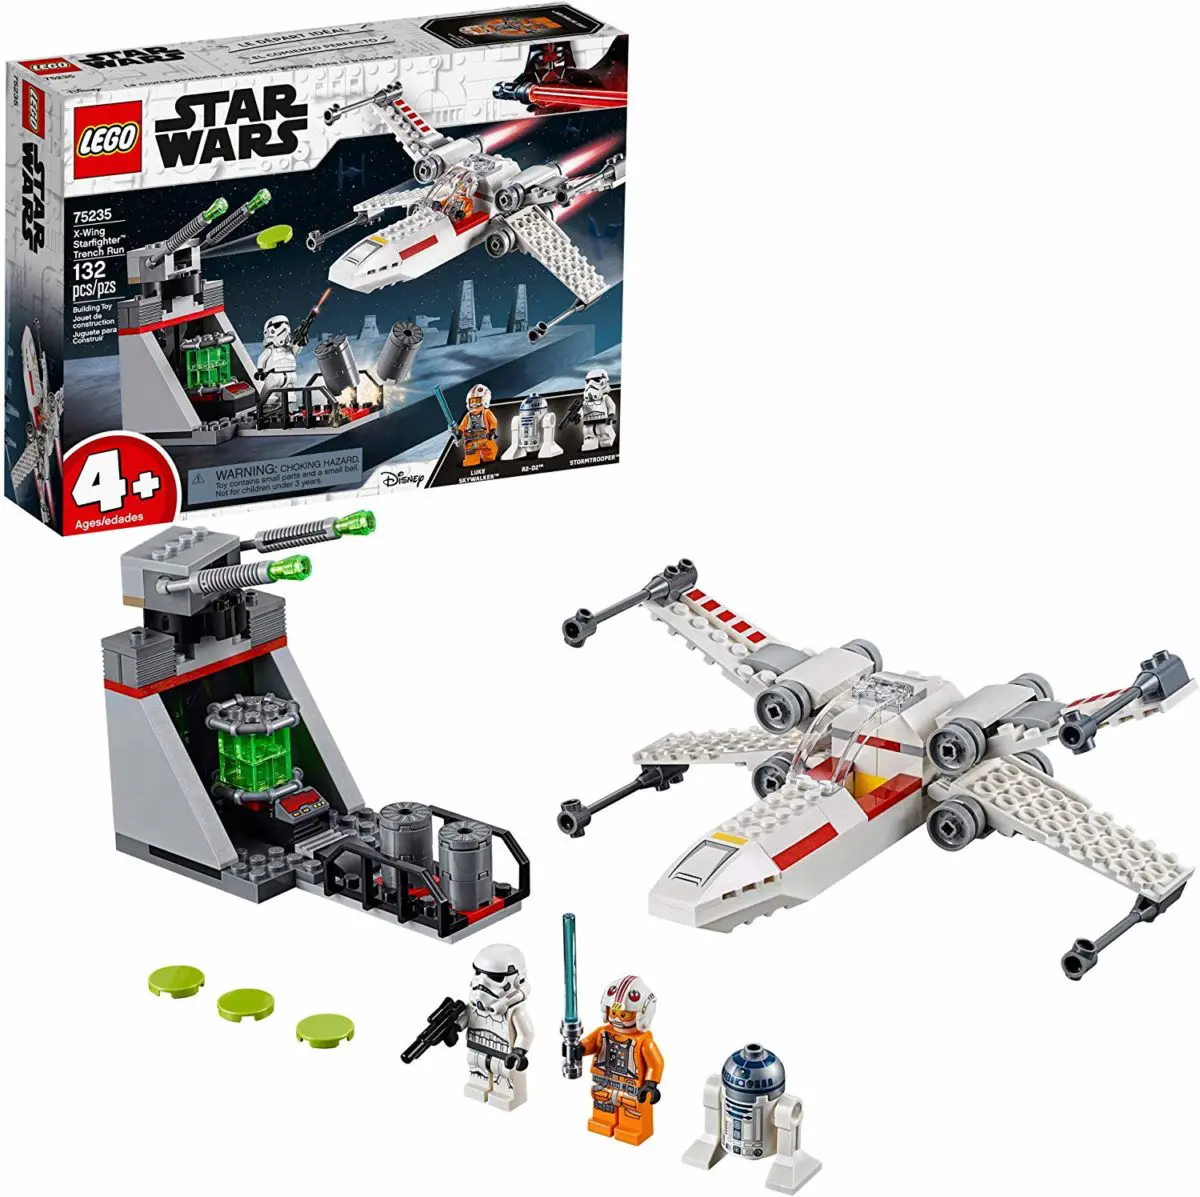 LEGO Star Wars X-Wing Starfighter Trench Run - Top Toys and Gifts for Six Year Old Boys 1